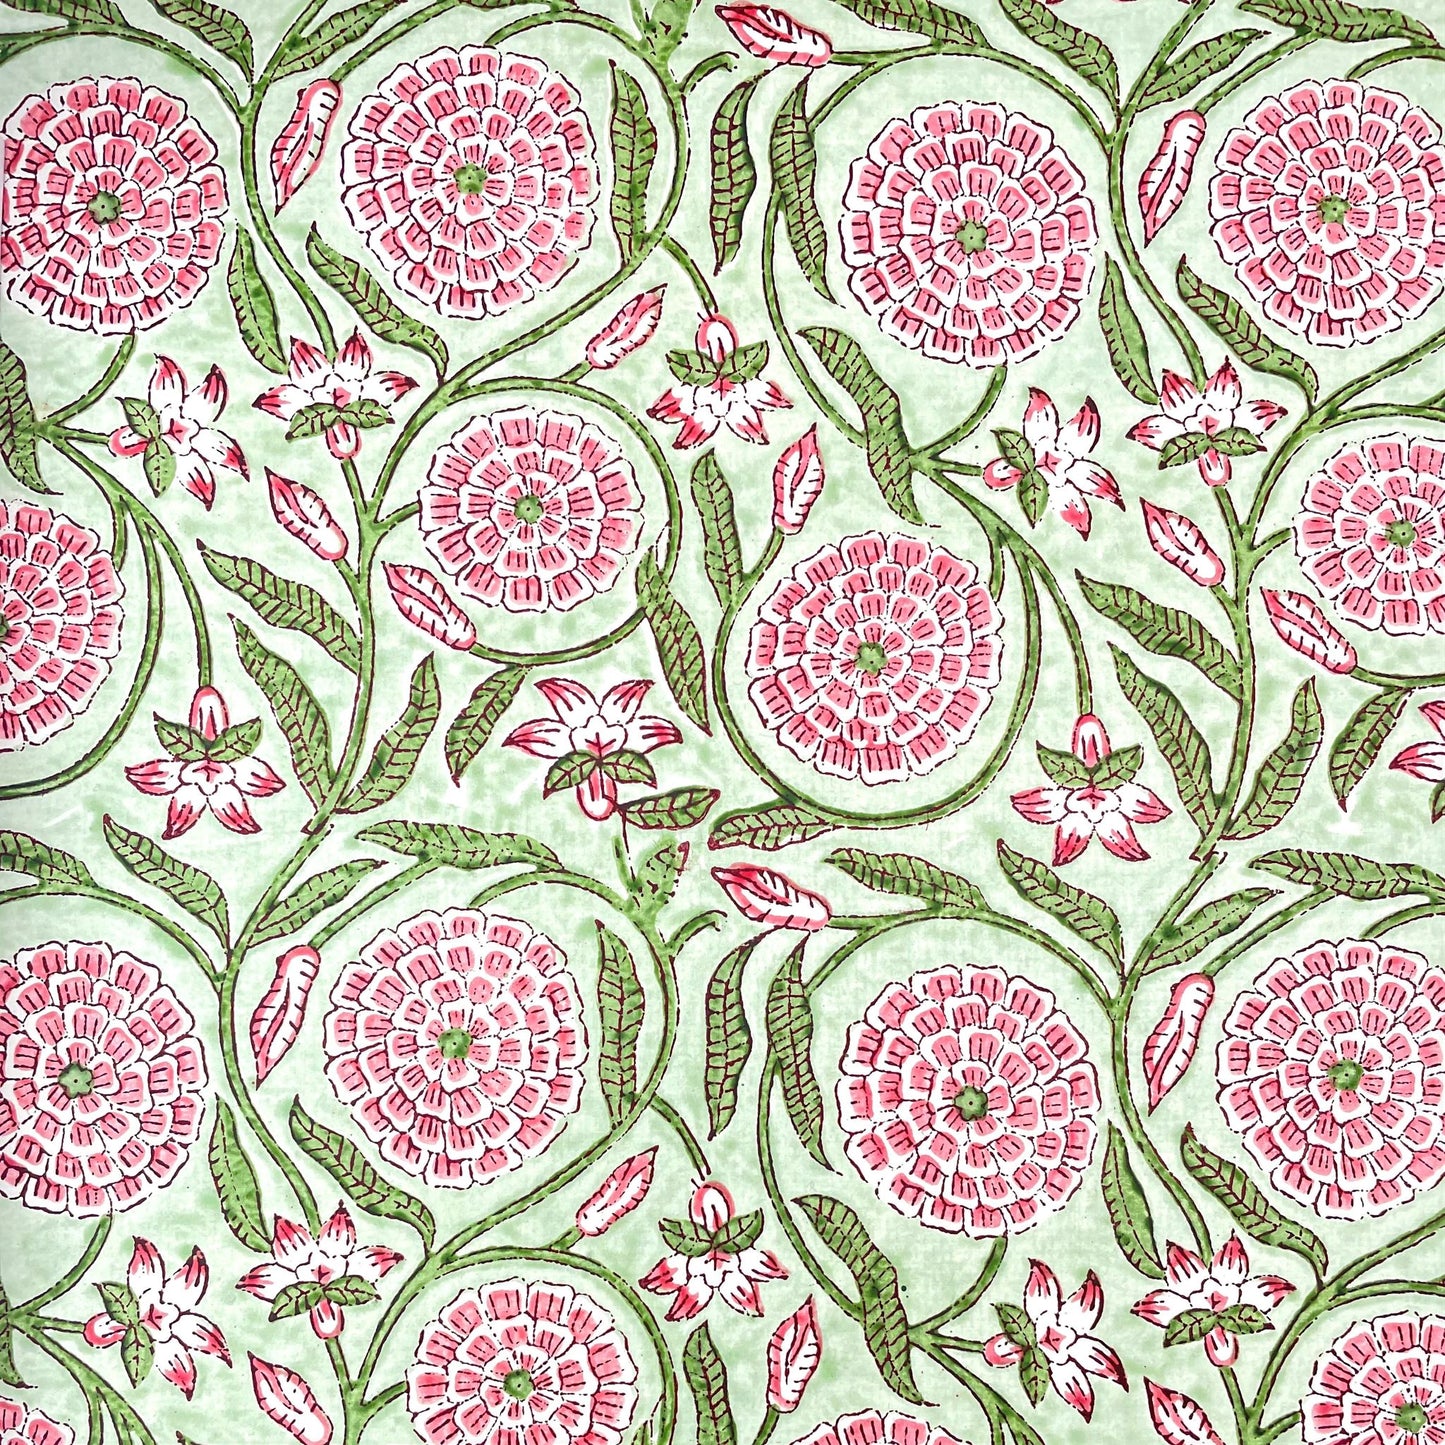 wrapping paper with repeat botanical pattern in pistachio green and pink by Paper Mirchi